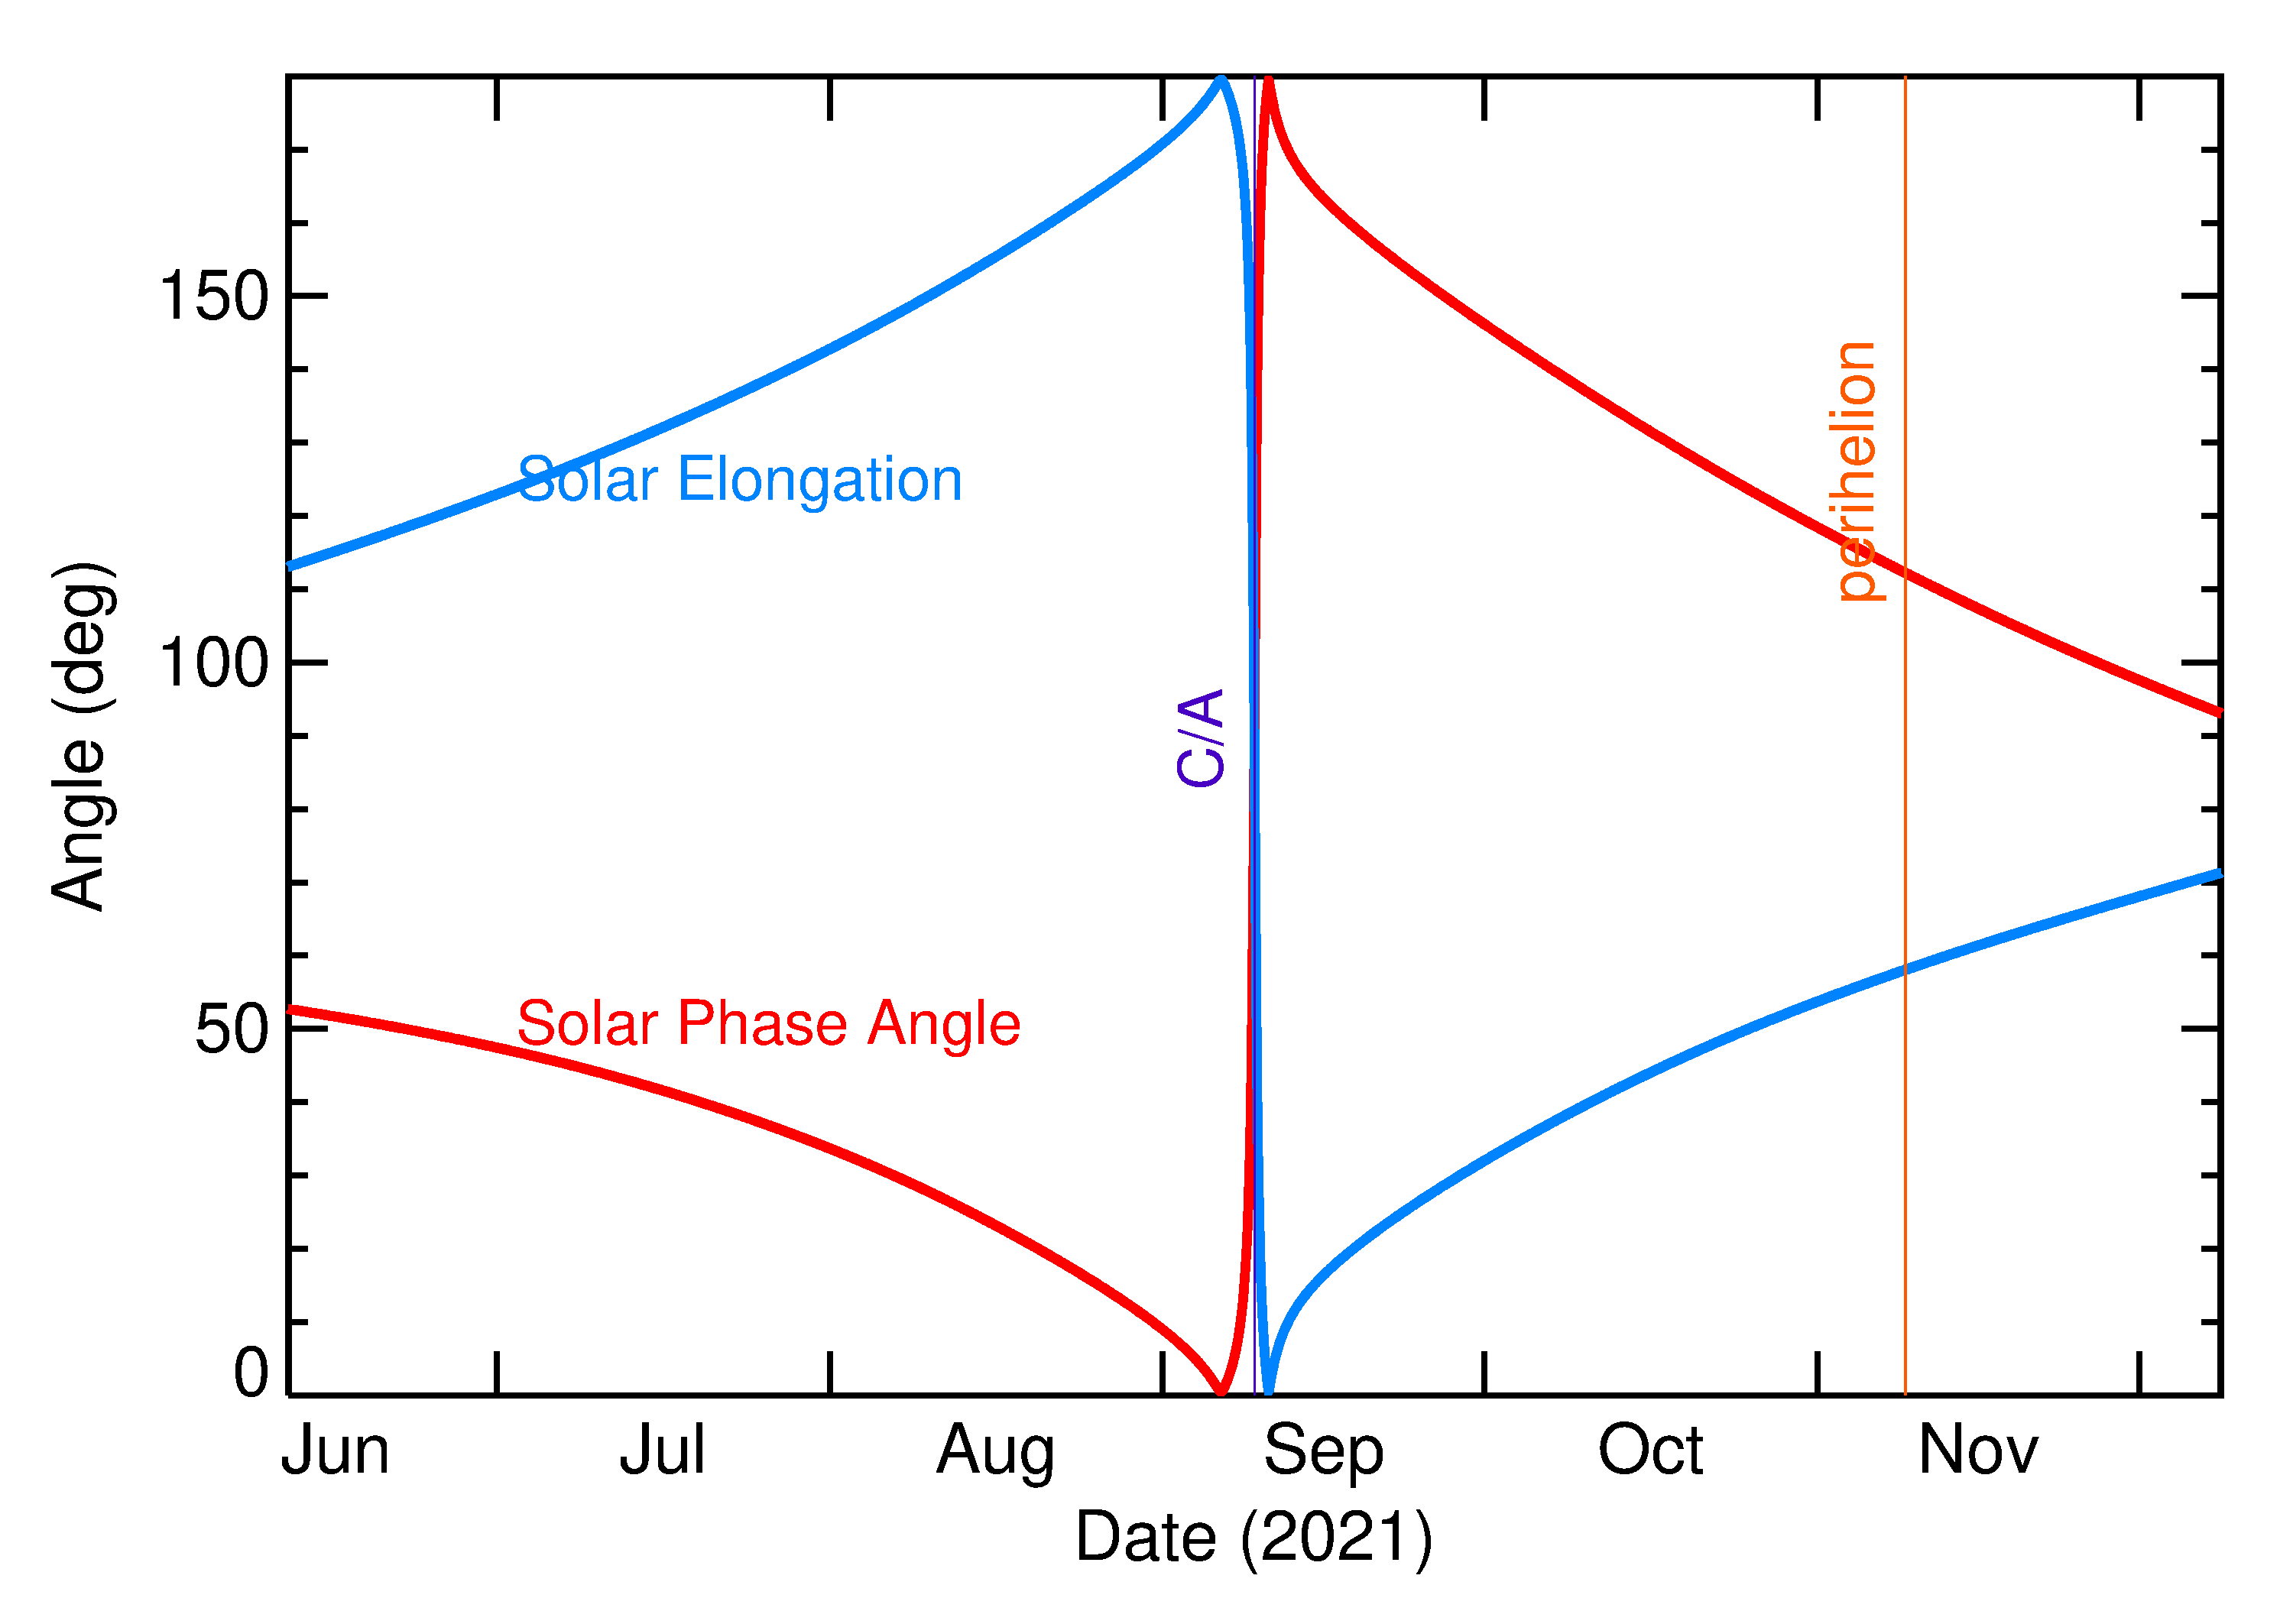 Solar Elongation and Solar Phase Angle of 2021 RP2 in the months around closest approach